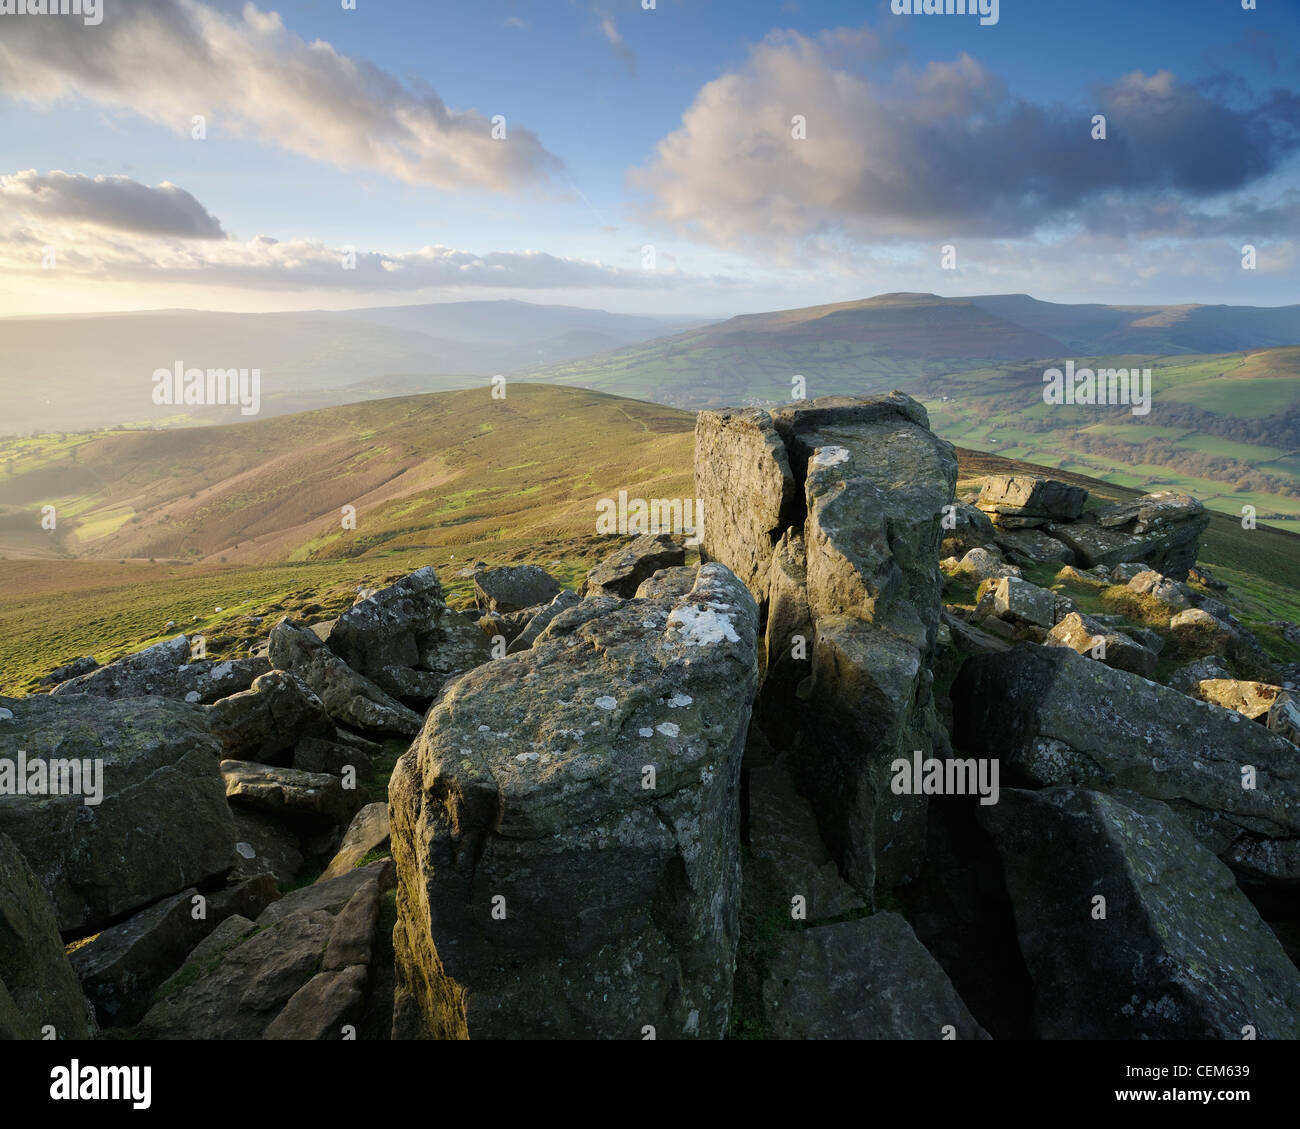 A spectacular view looking west from the top of Sugar Loaf mountain in the Black Mountains, Brecon Beacons, Wales, UK. Stock Photo